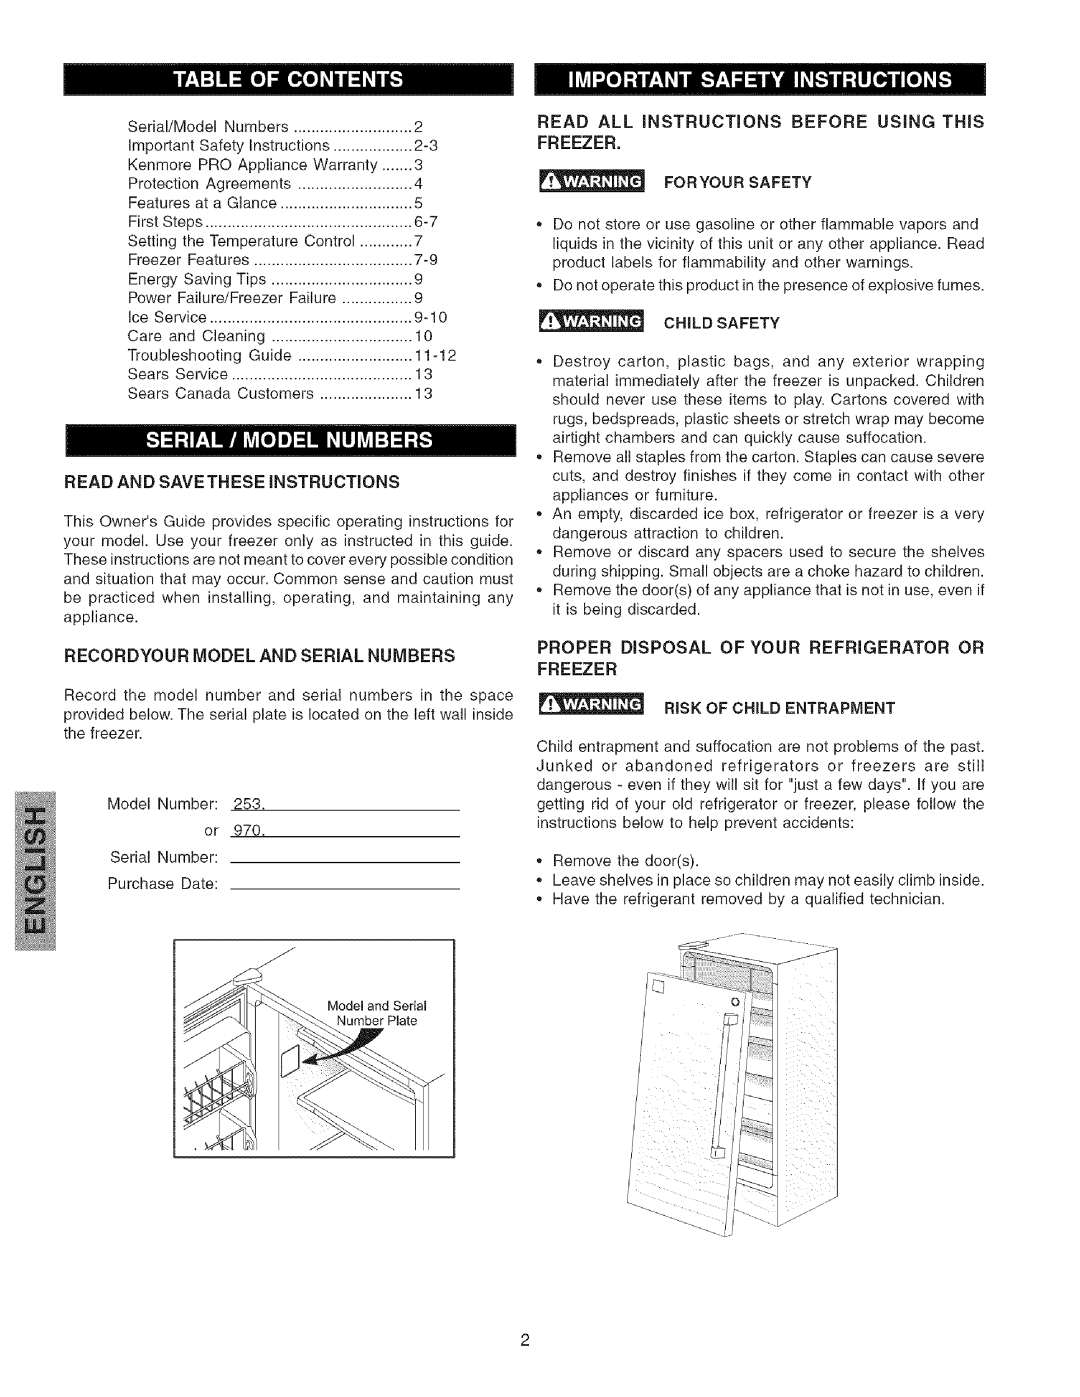 Kenmore 25344133801 manual Read And Savethese Instructions, Recordyour Model And Serial Numbers, Risk Of Child Entrapment 